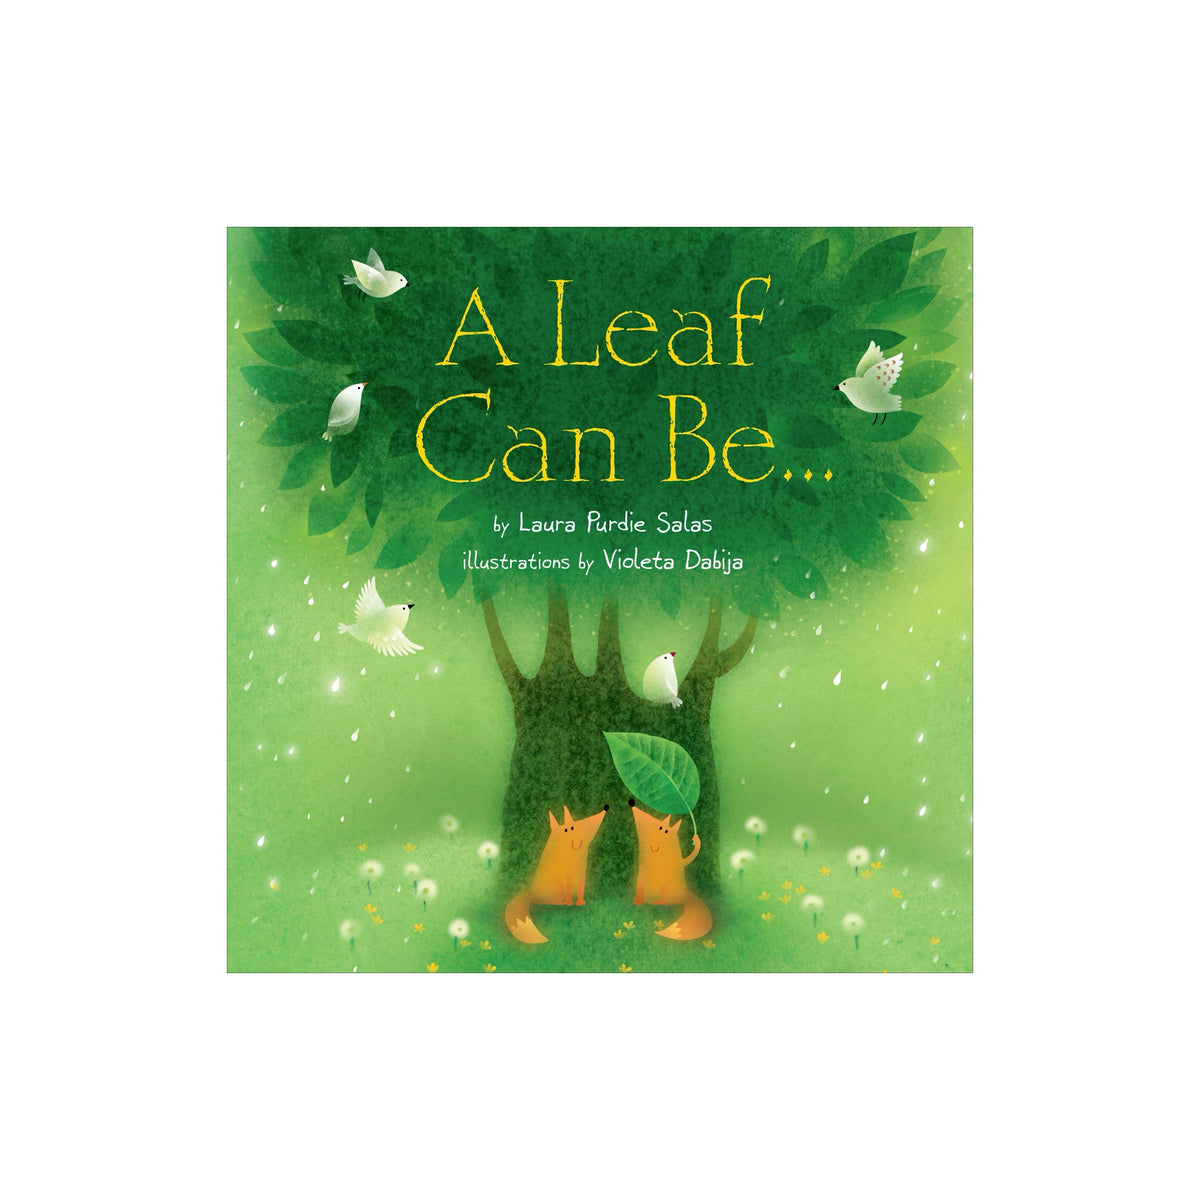 A Leaf Can Be...